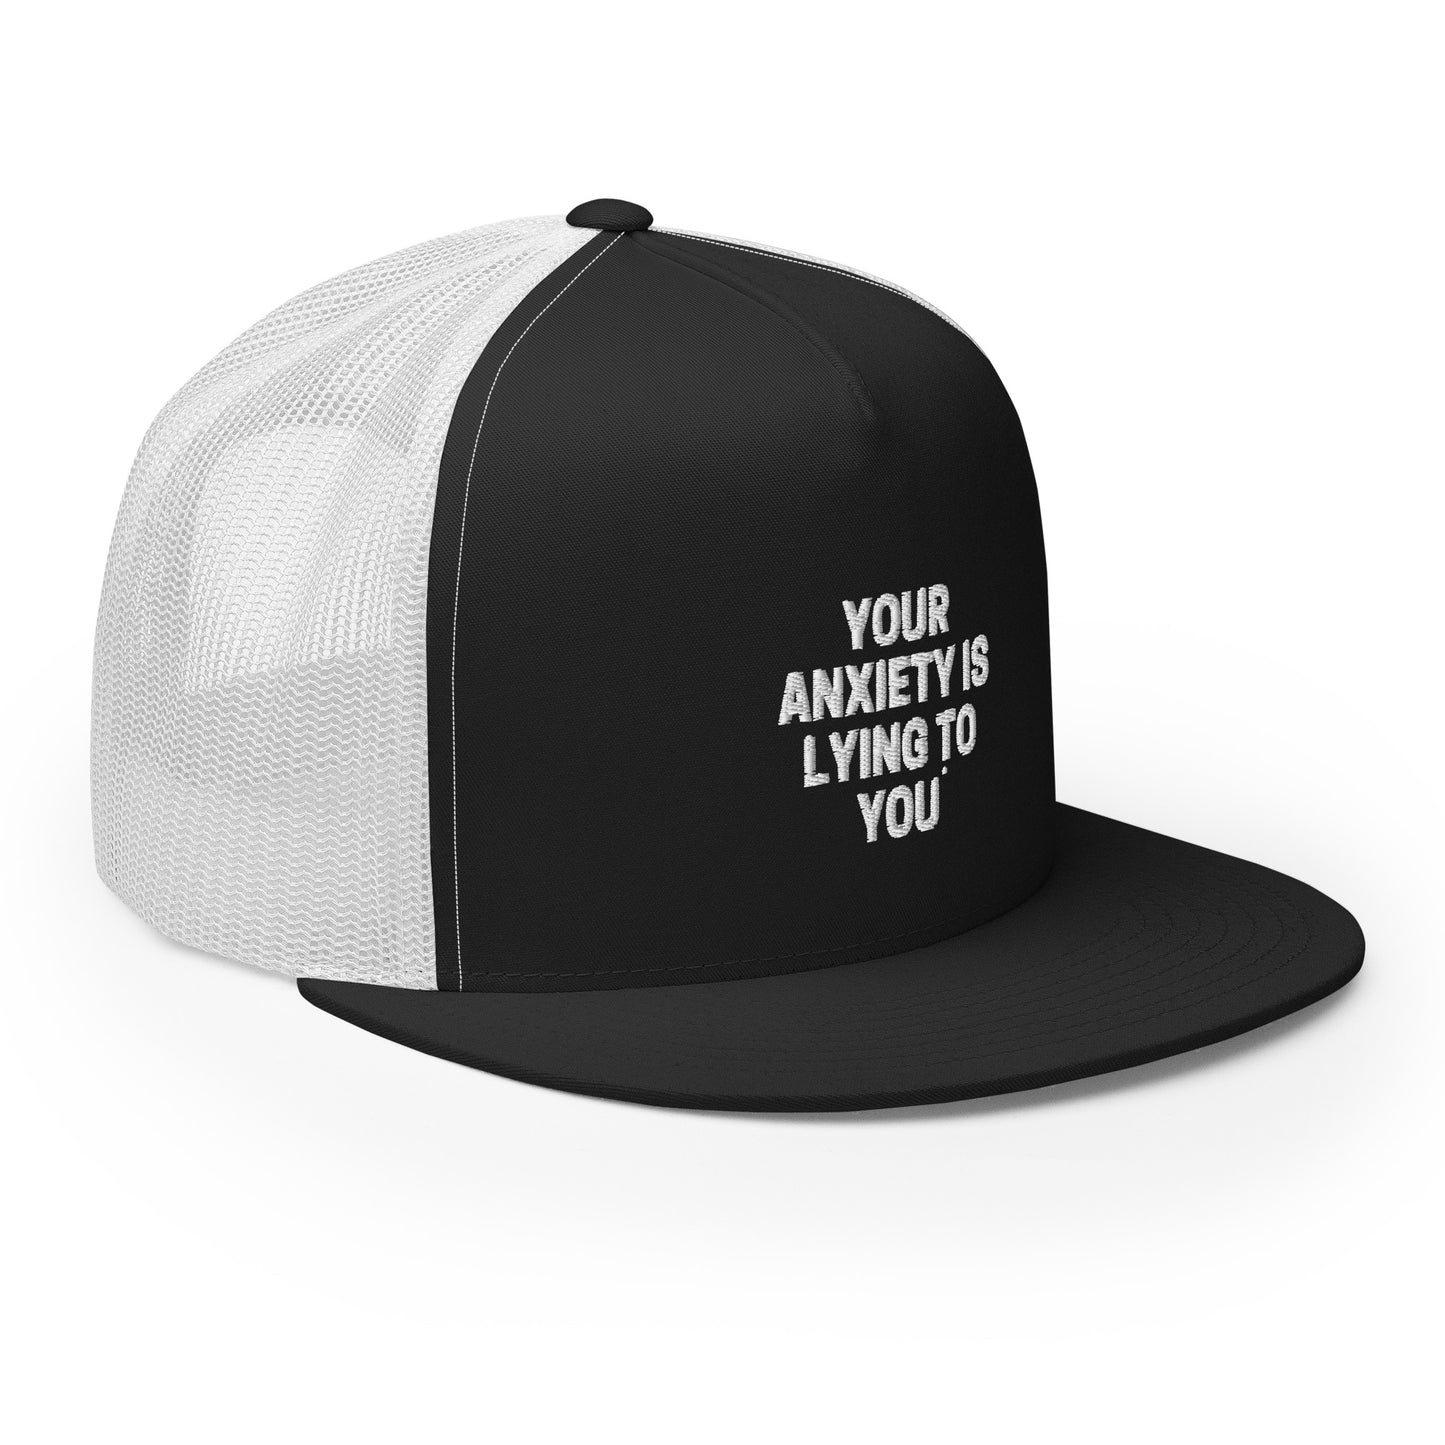 Your Anxiety is Lying to You Trucker Cap